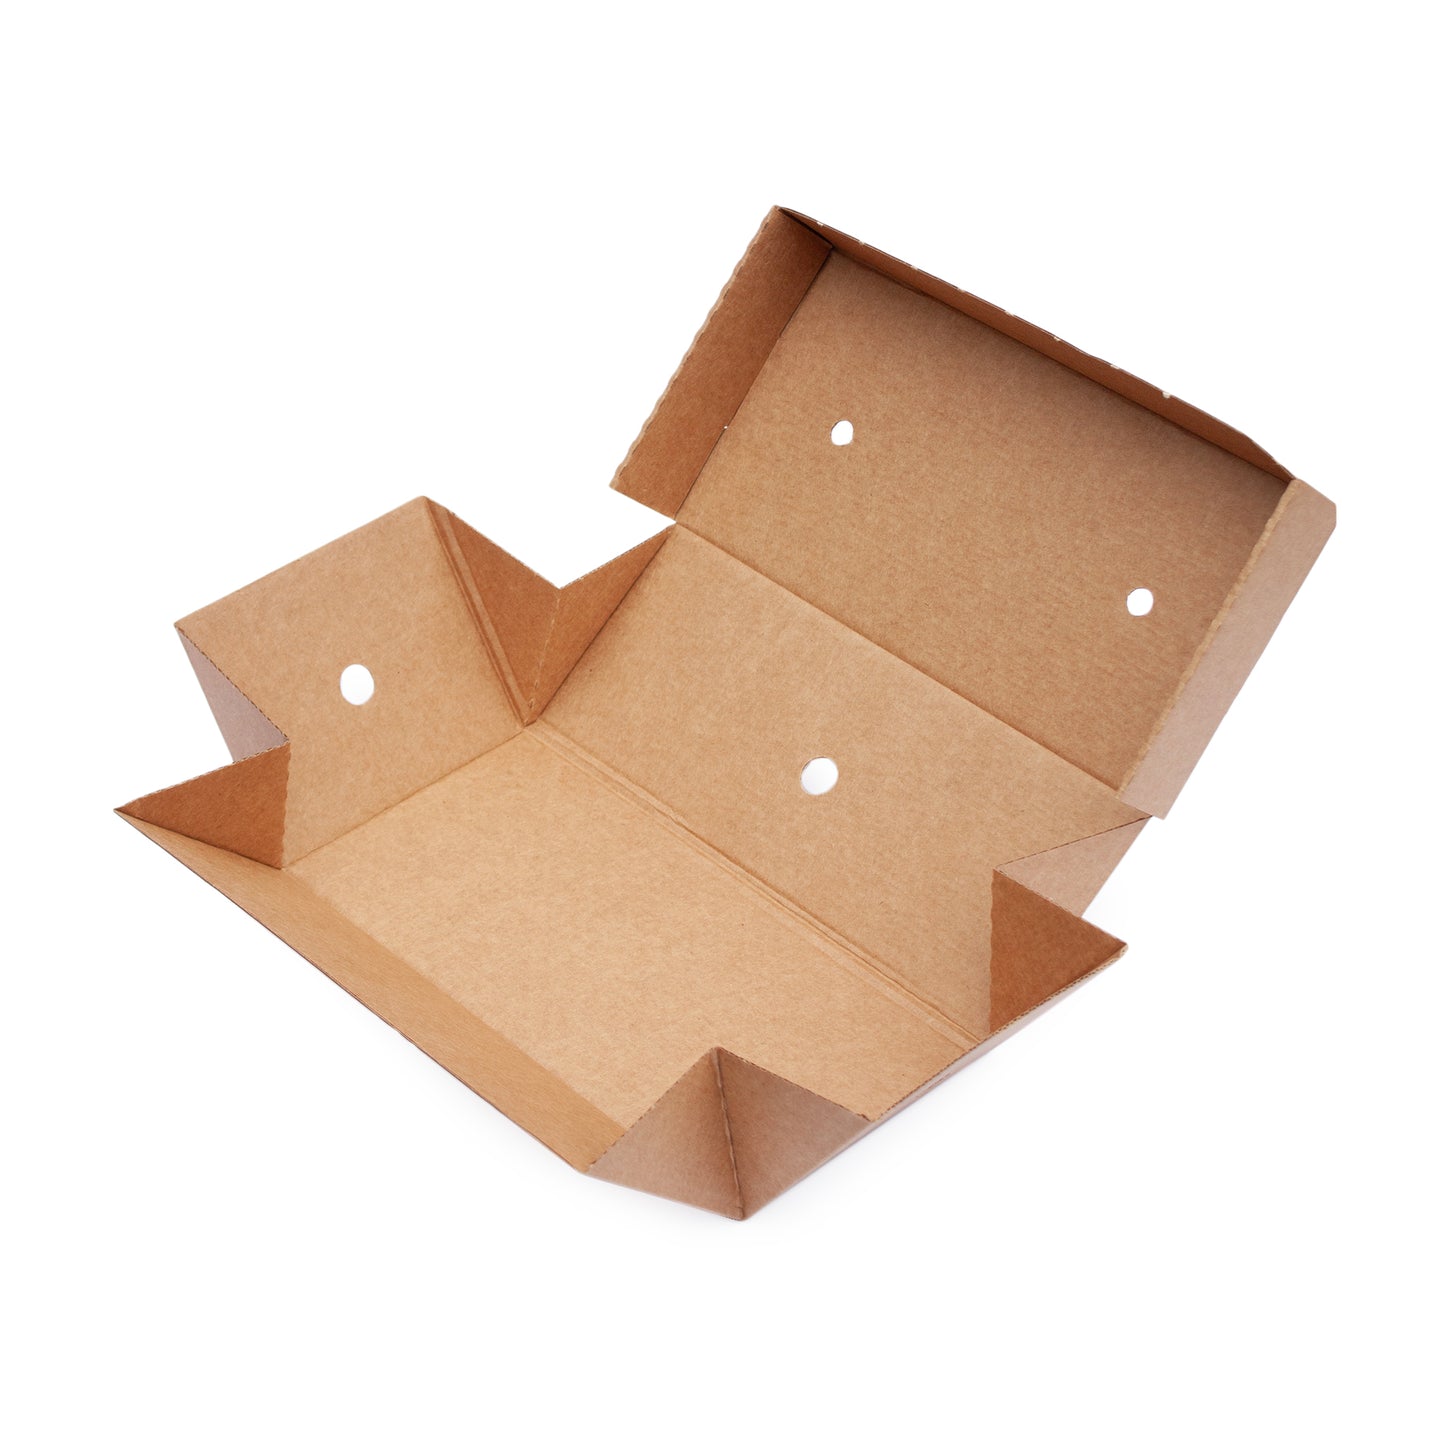 Burger delivery packaging Large Premium Burger box 100 units, 244mm X 122mm X 102mm (Corrugated)